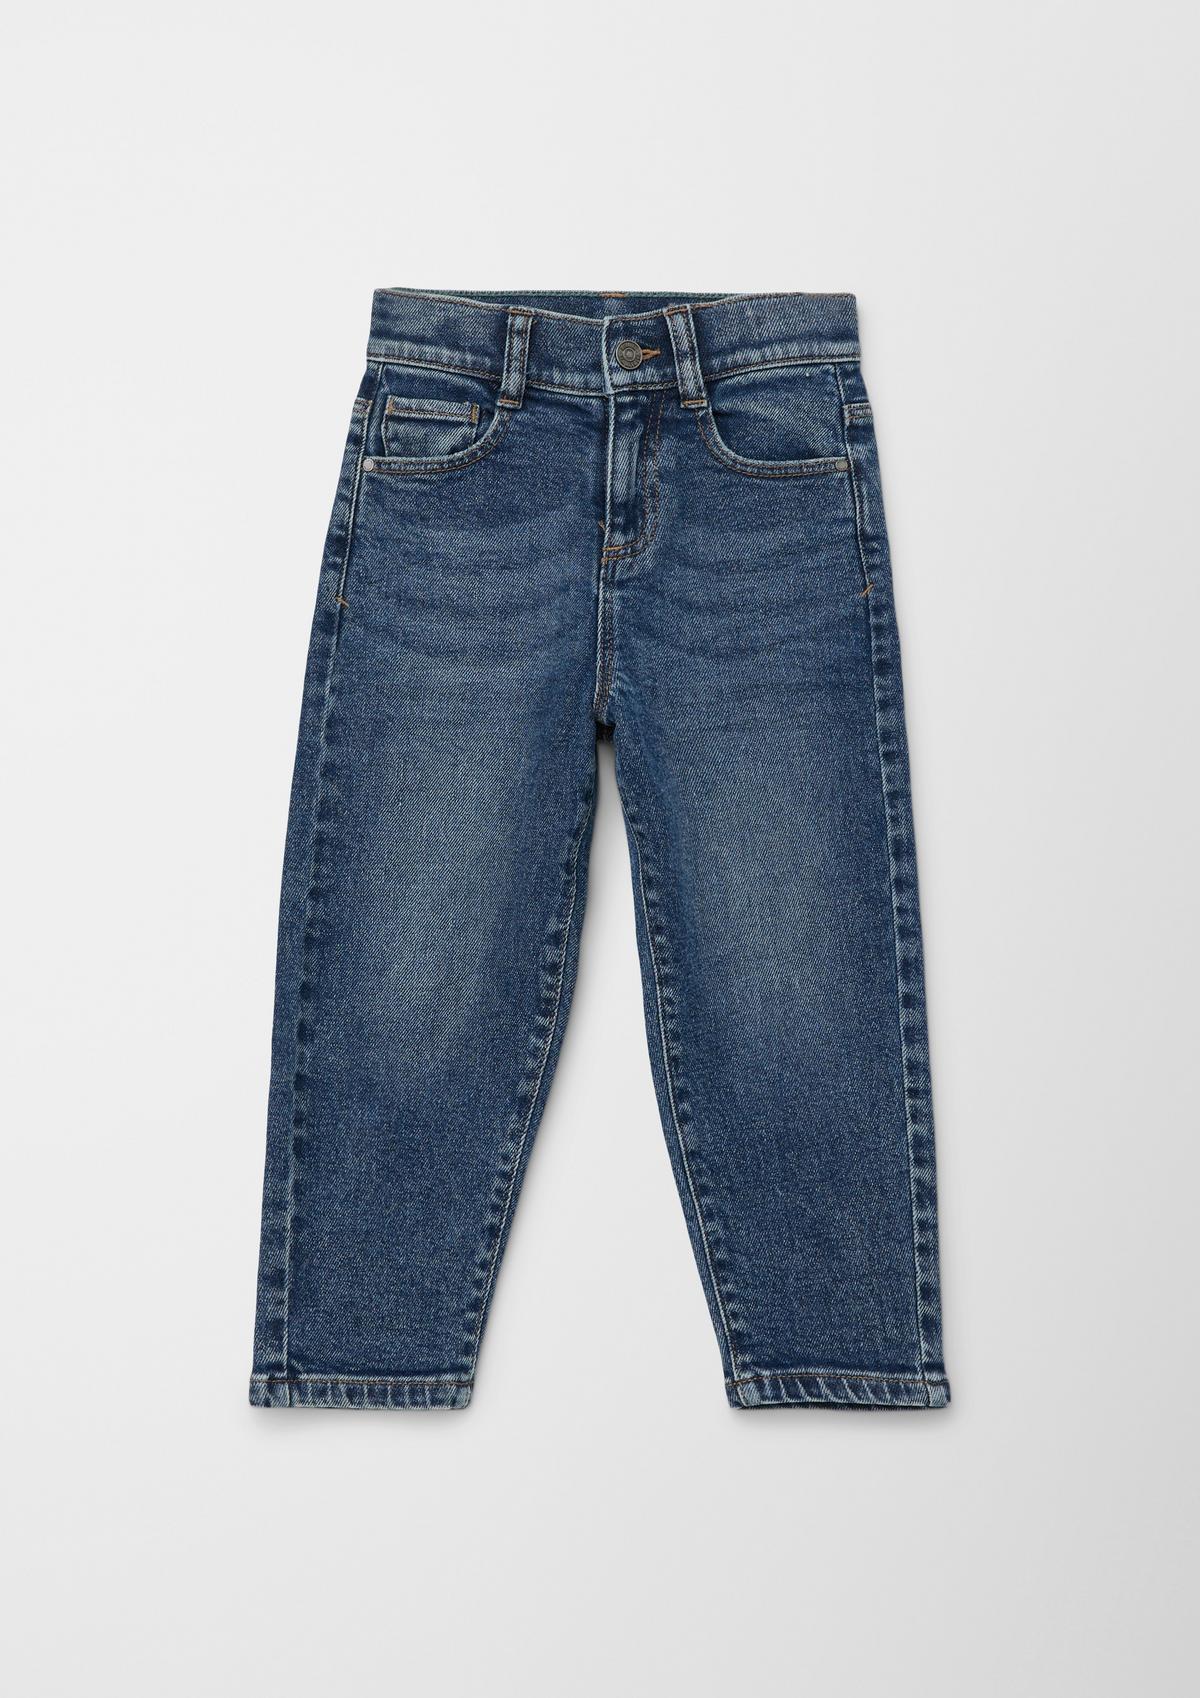 boys denim Order for jeans and